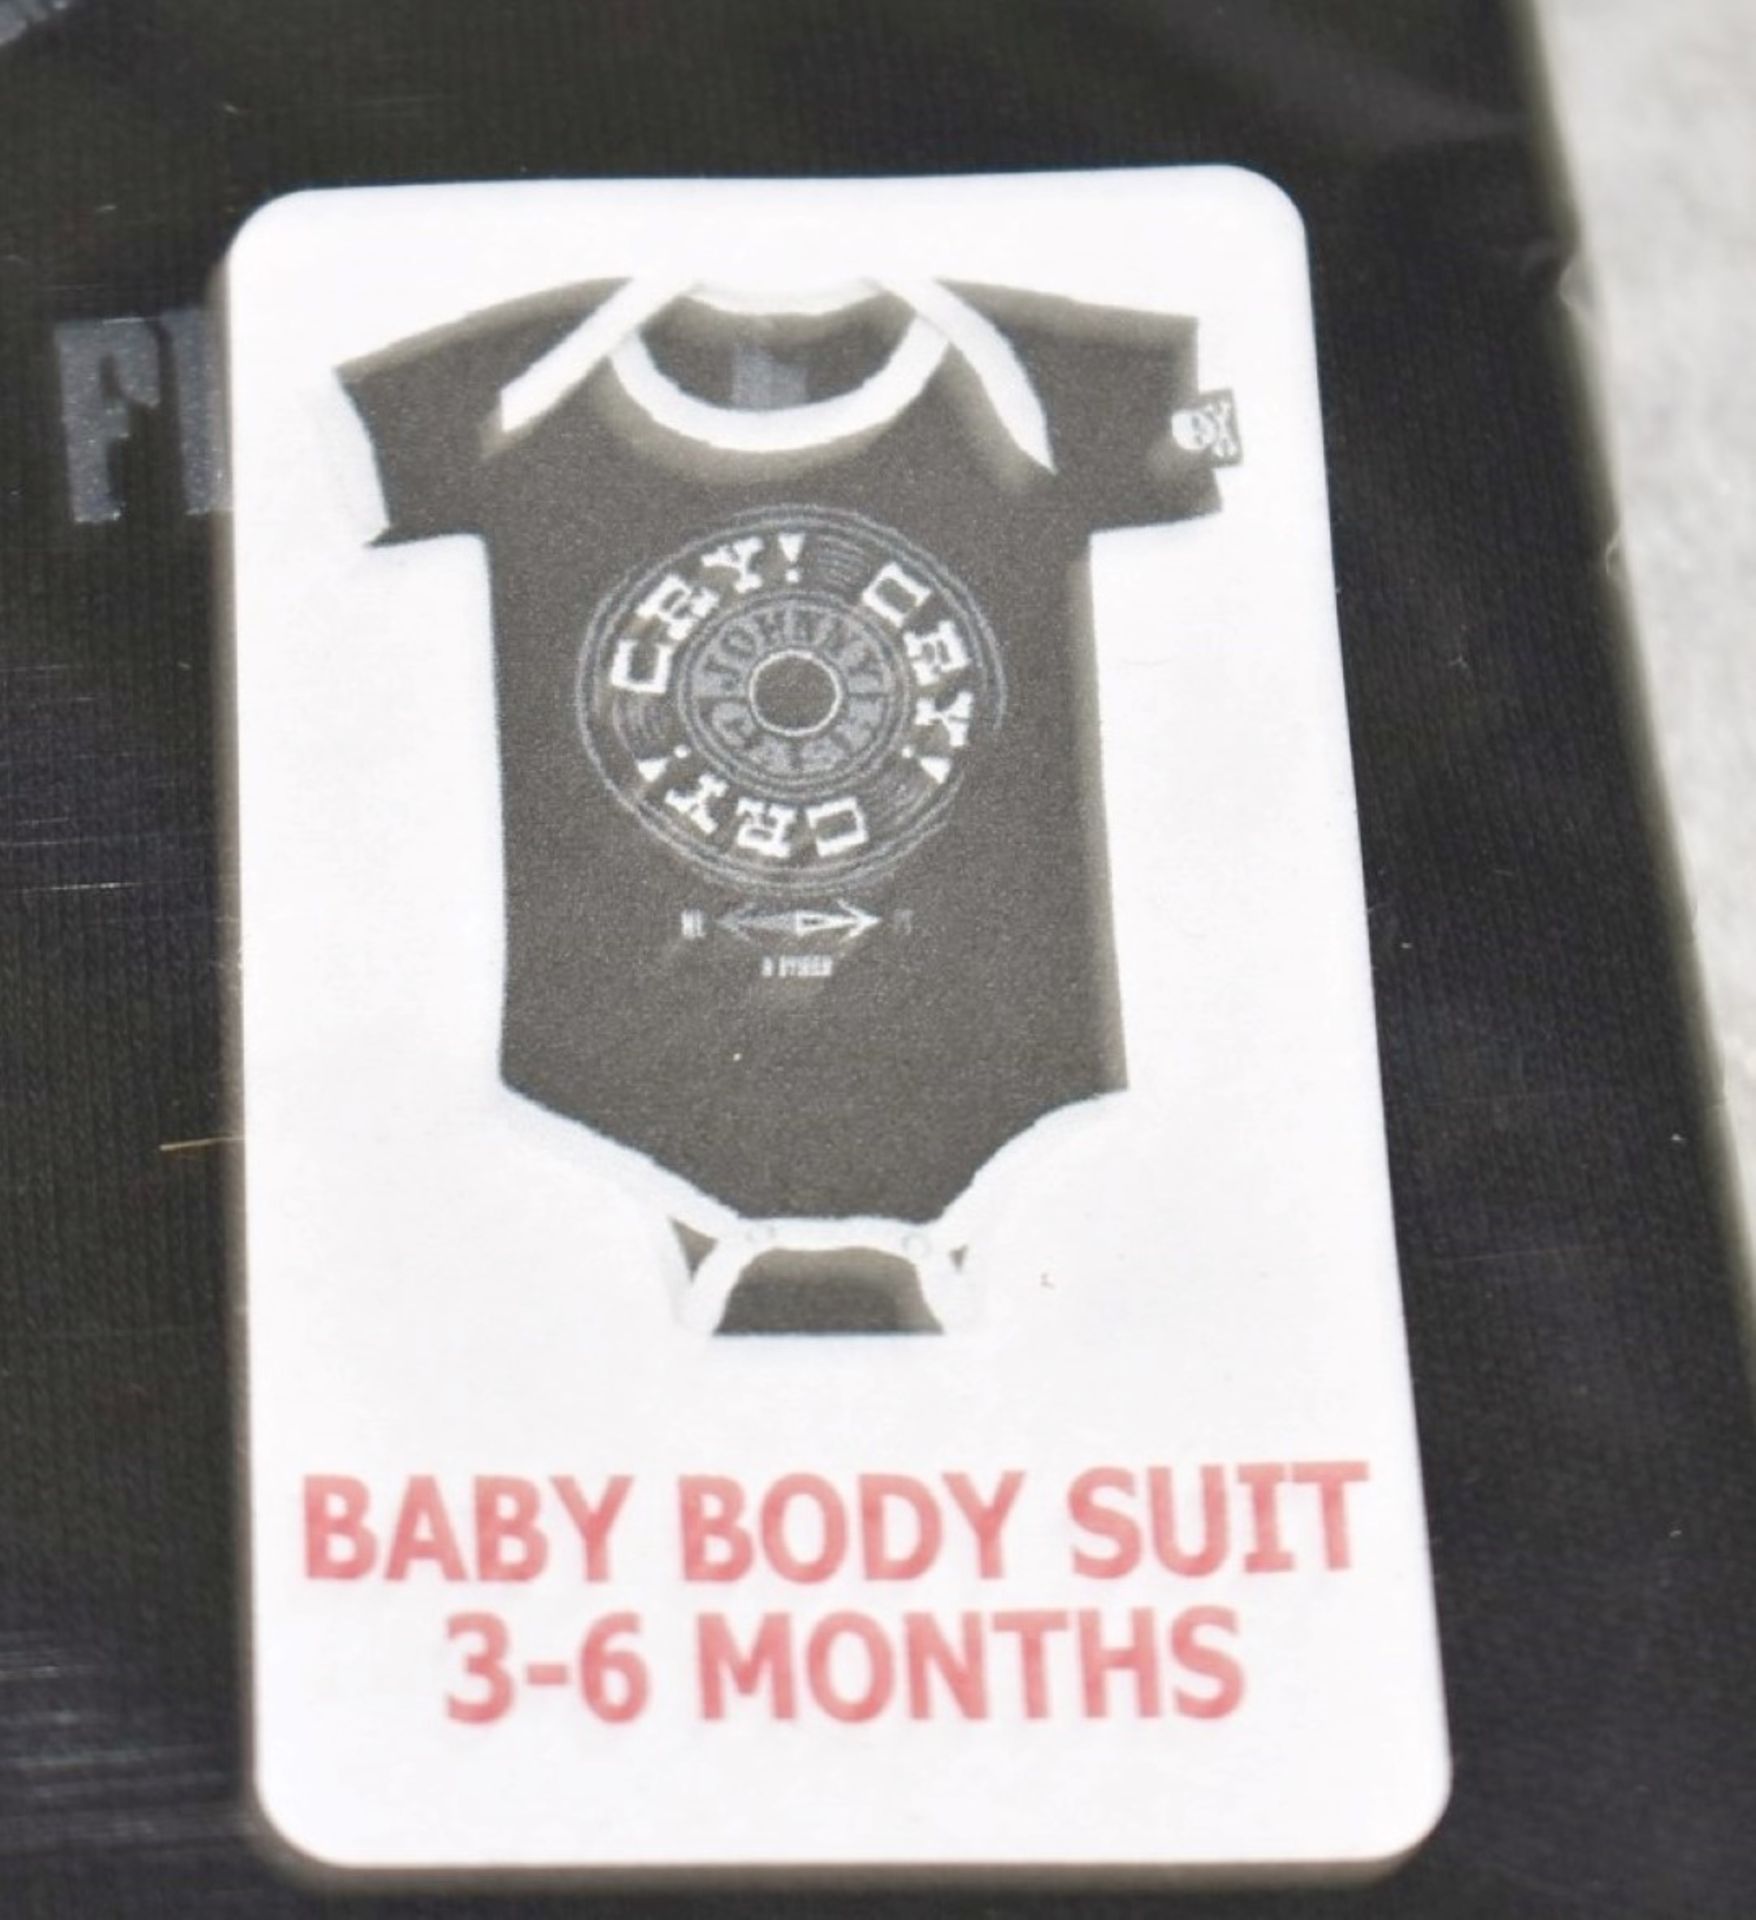 4 x Assorted Baby Body Suits - Features Johnny Cash and the Ramones - Size: 3 to 6 Months - - Image 7 of 8